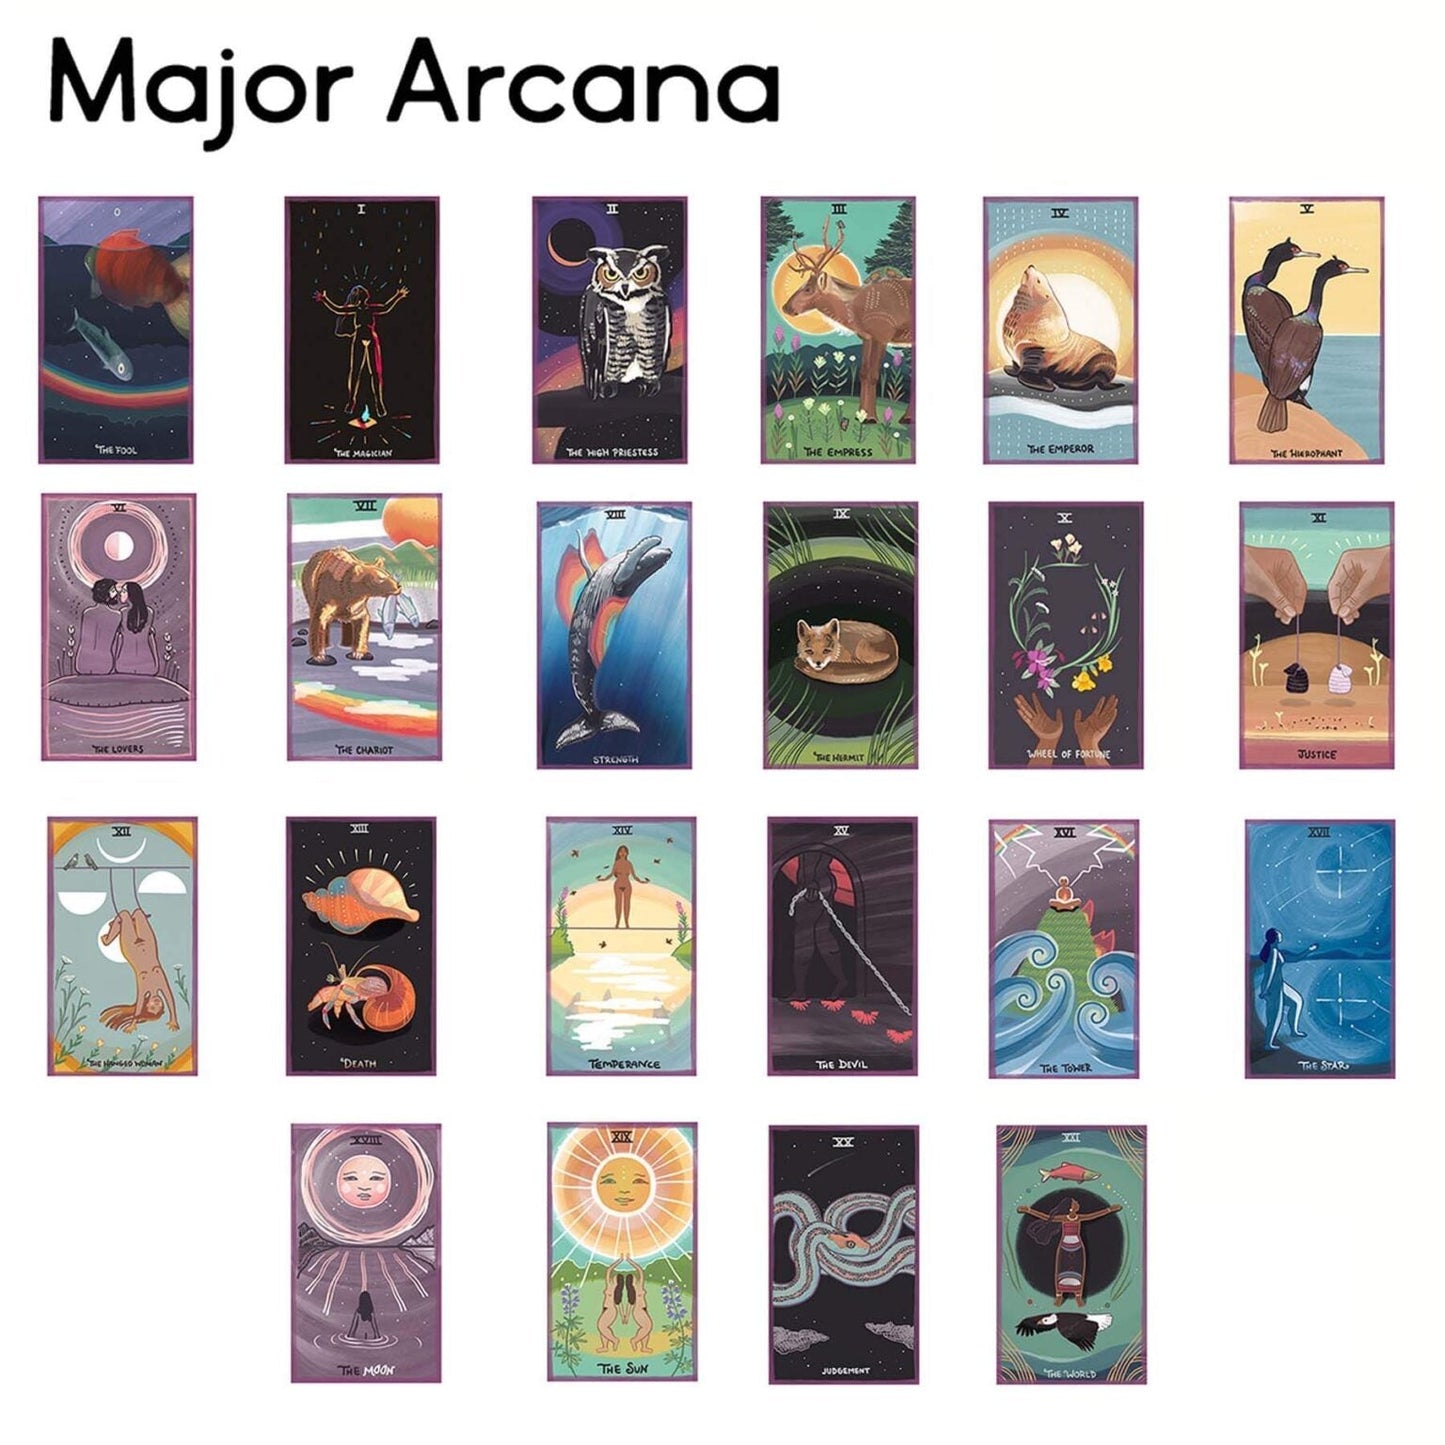 The Major Arcana cards from the Gentle Tarot deck.